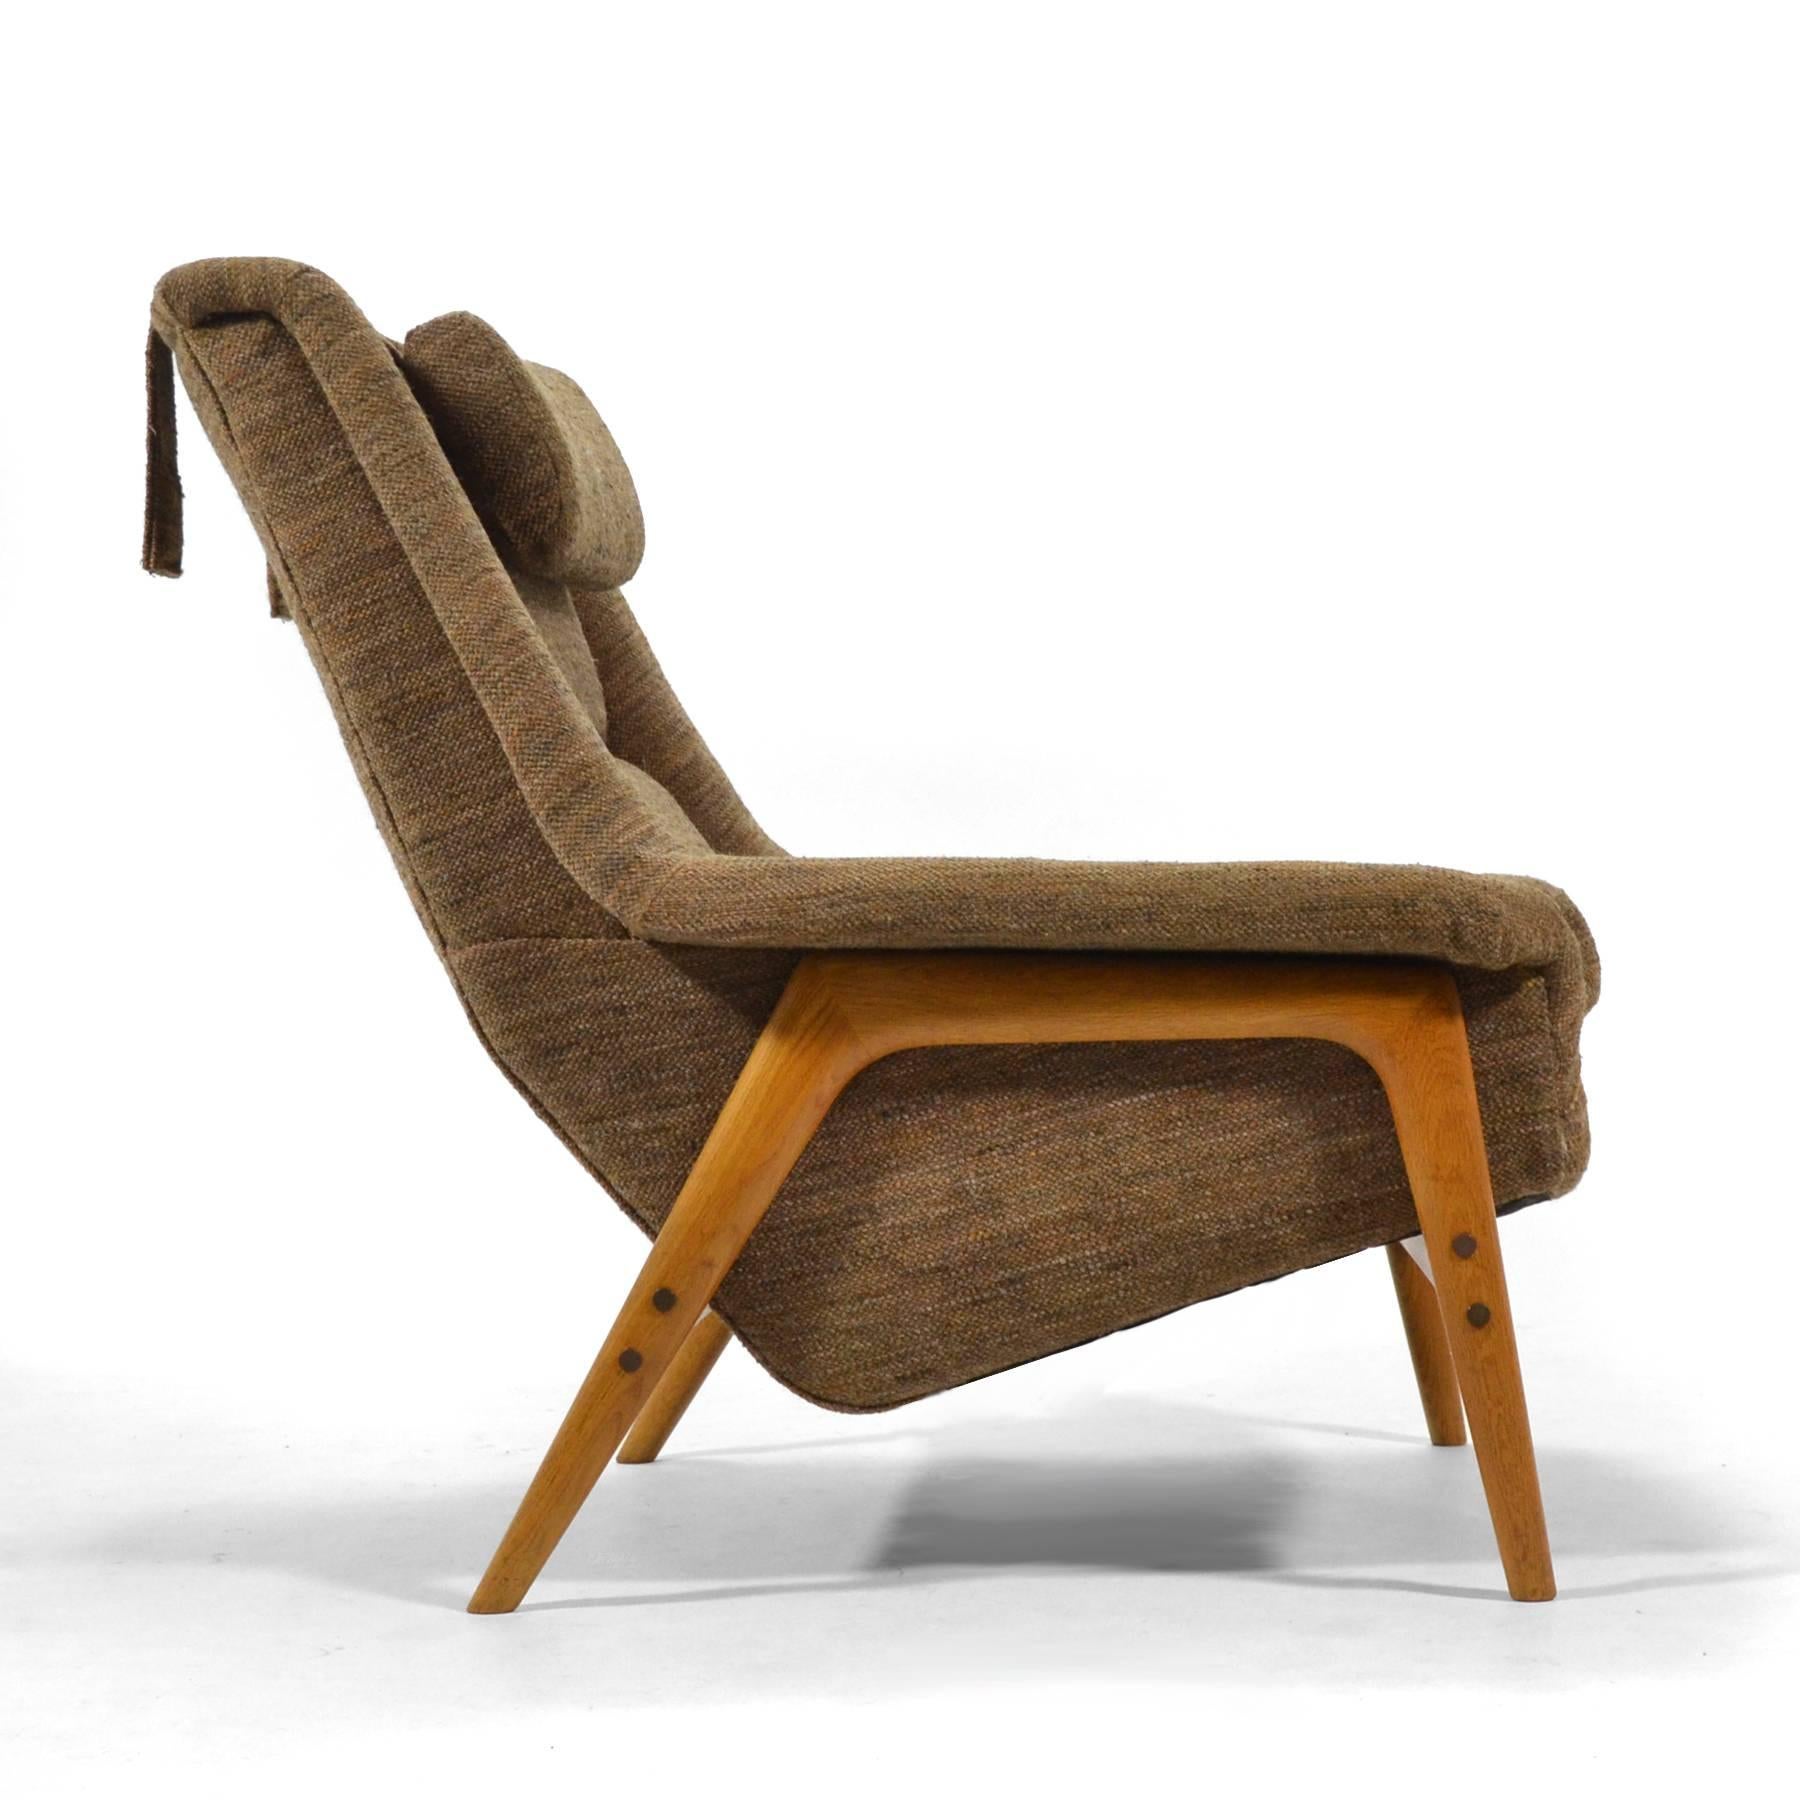 This generous lounge chair designed by Folke Ohlsson for DUX is remarkably comfortable. It shares qualities with the womb chair by Eero Saarinen but has angular lines rather than the curvy organic form of the womb chair. The upholstered body is